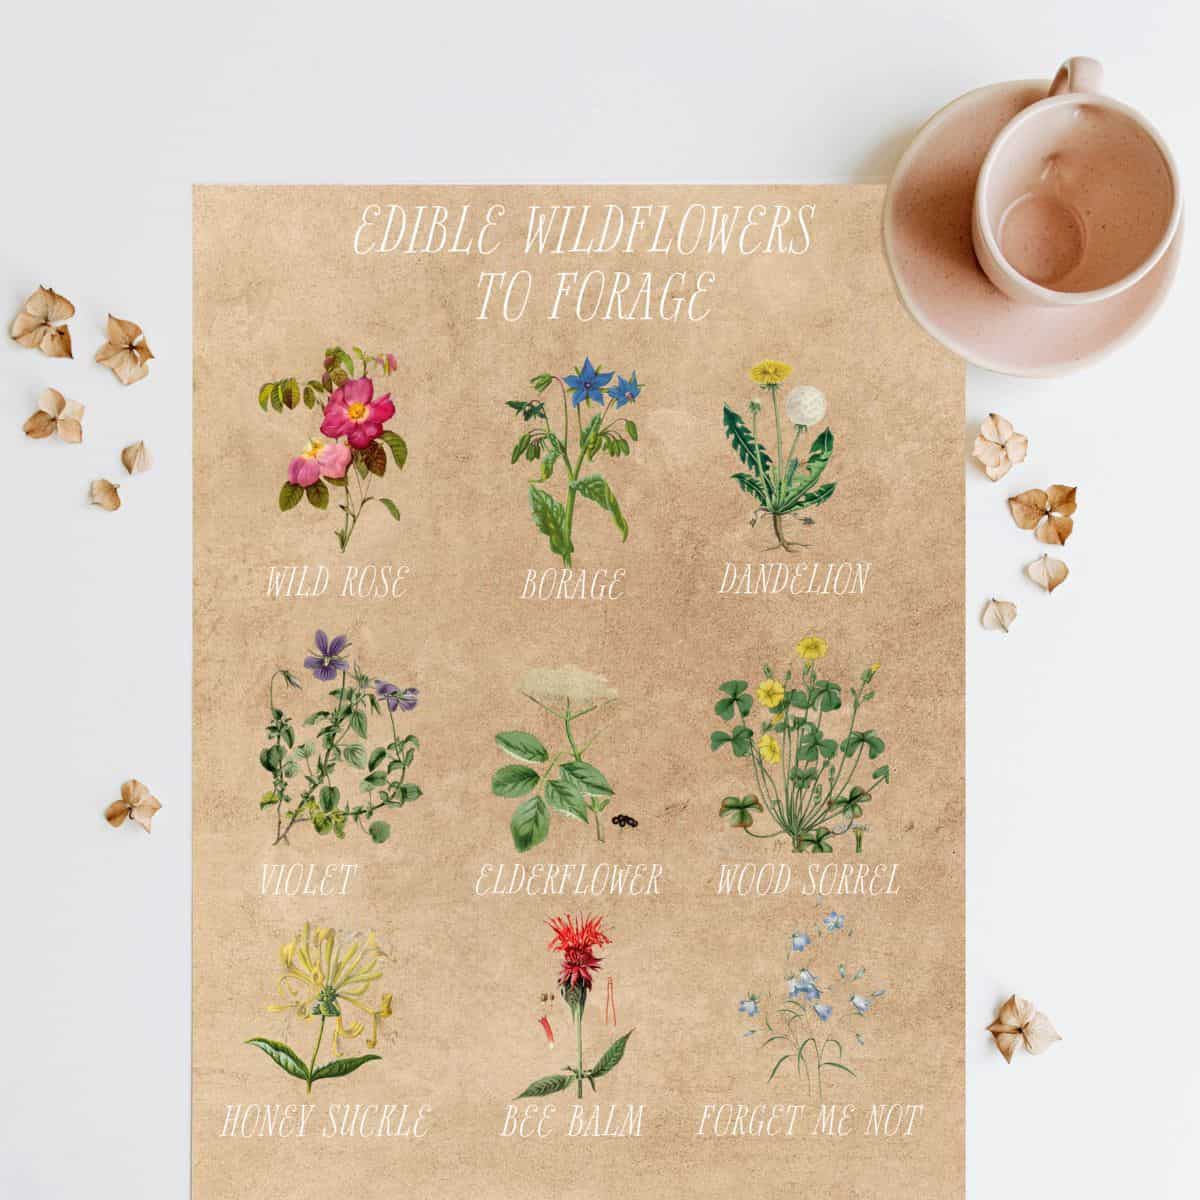 Edible Wildflowers to forage and where to find them